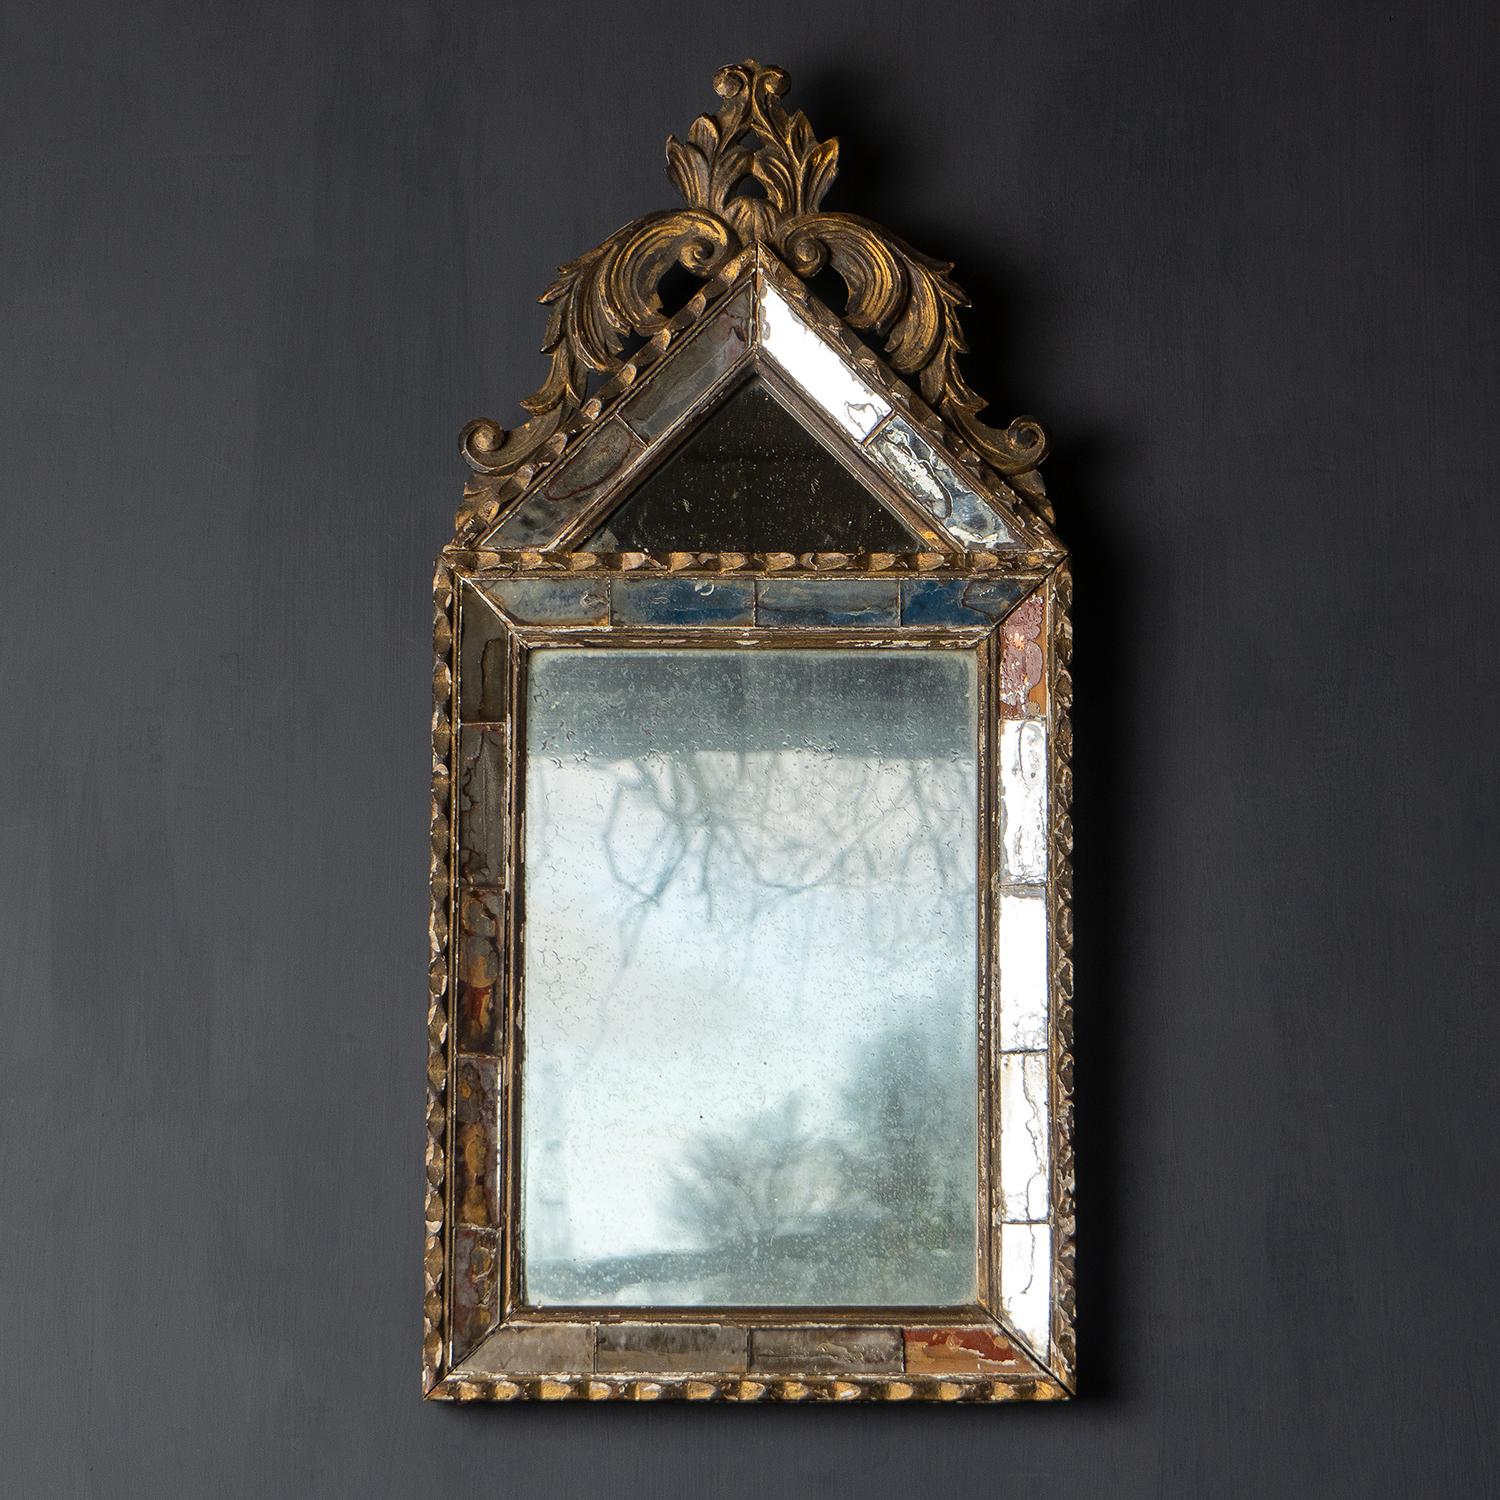 Antique Baroque style cushion mirror

A very decorative and elegant mirror with carved foliate details over the pediment top section.

There is wear throughout which we think adds to its charm, and aesthetic and tells its story. The wooden